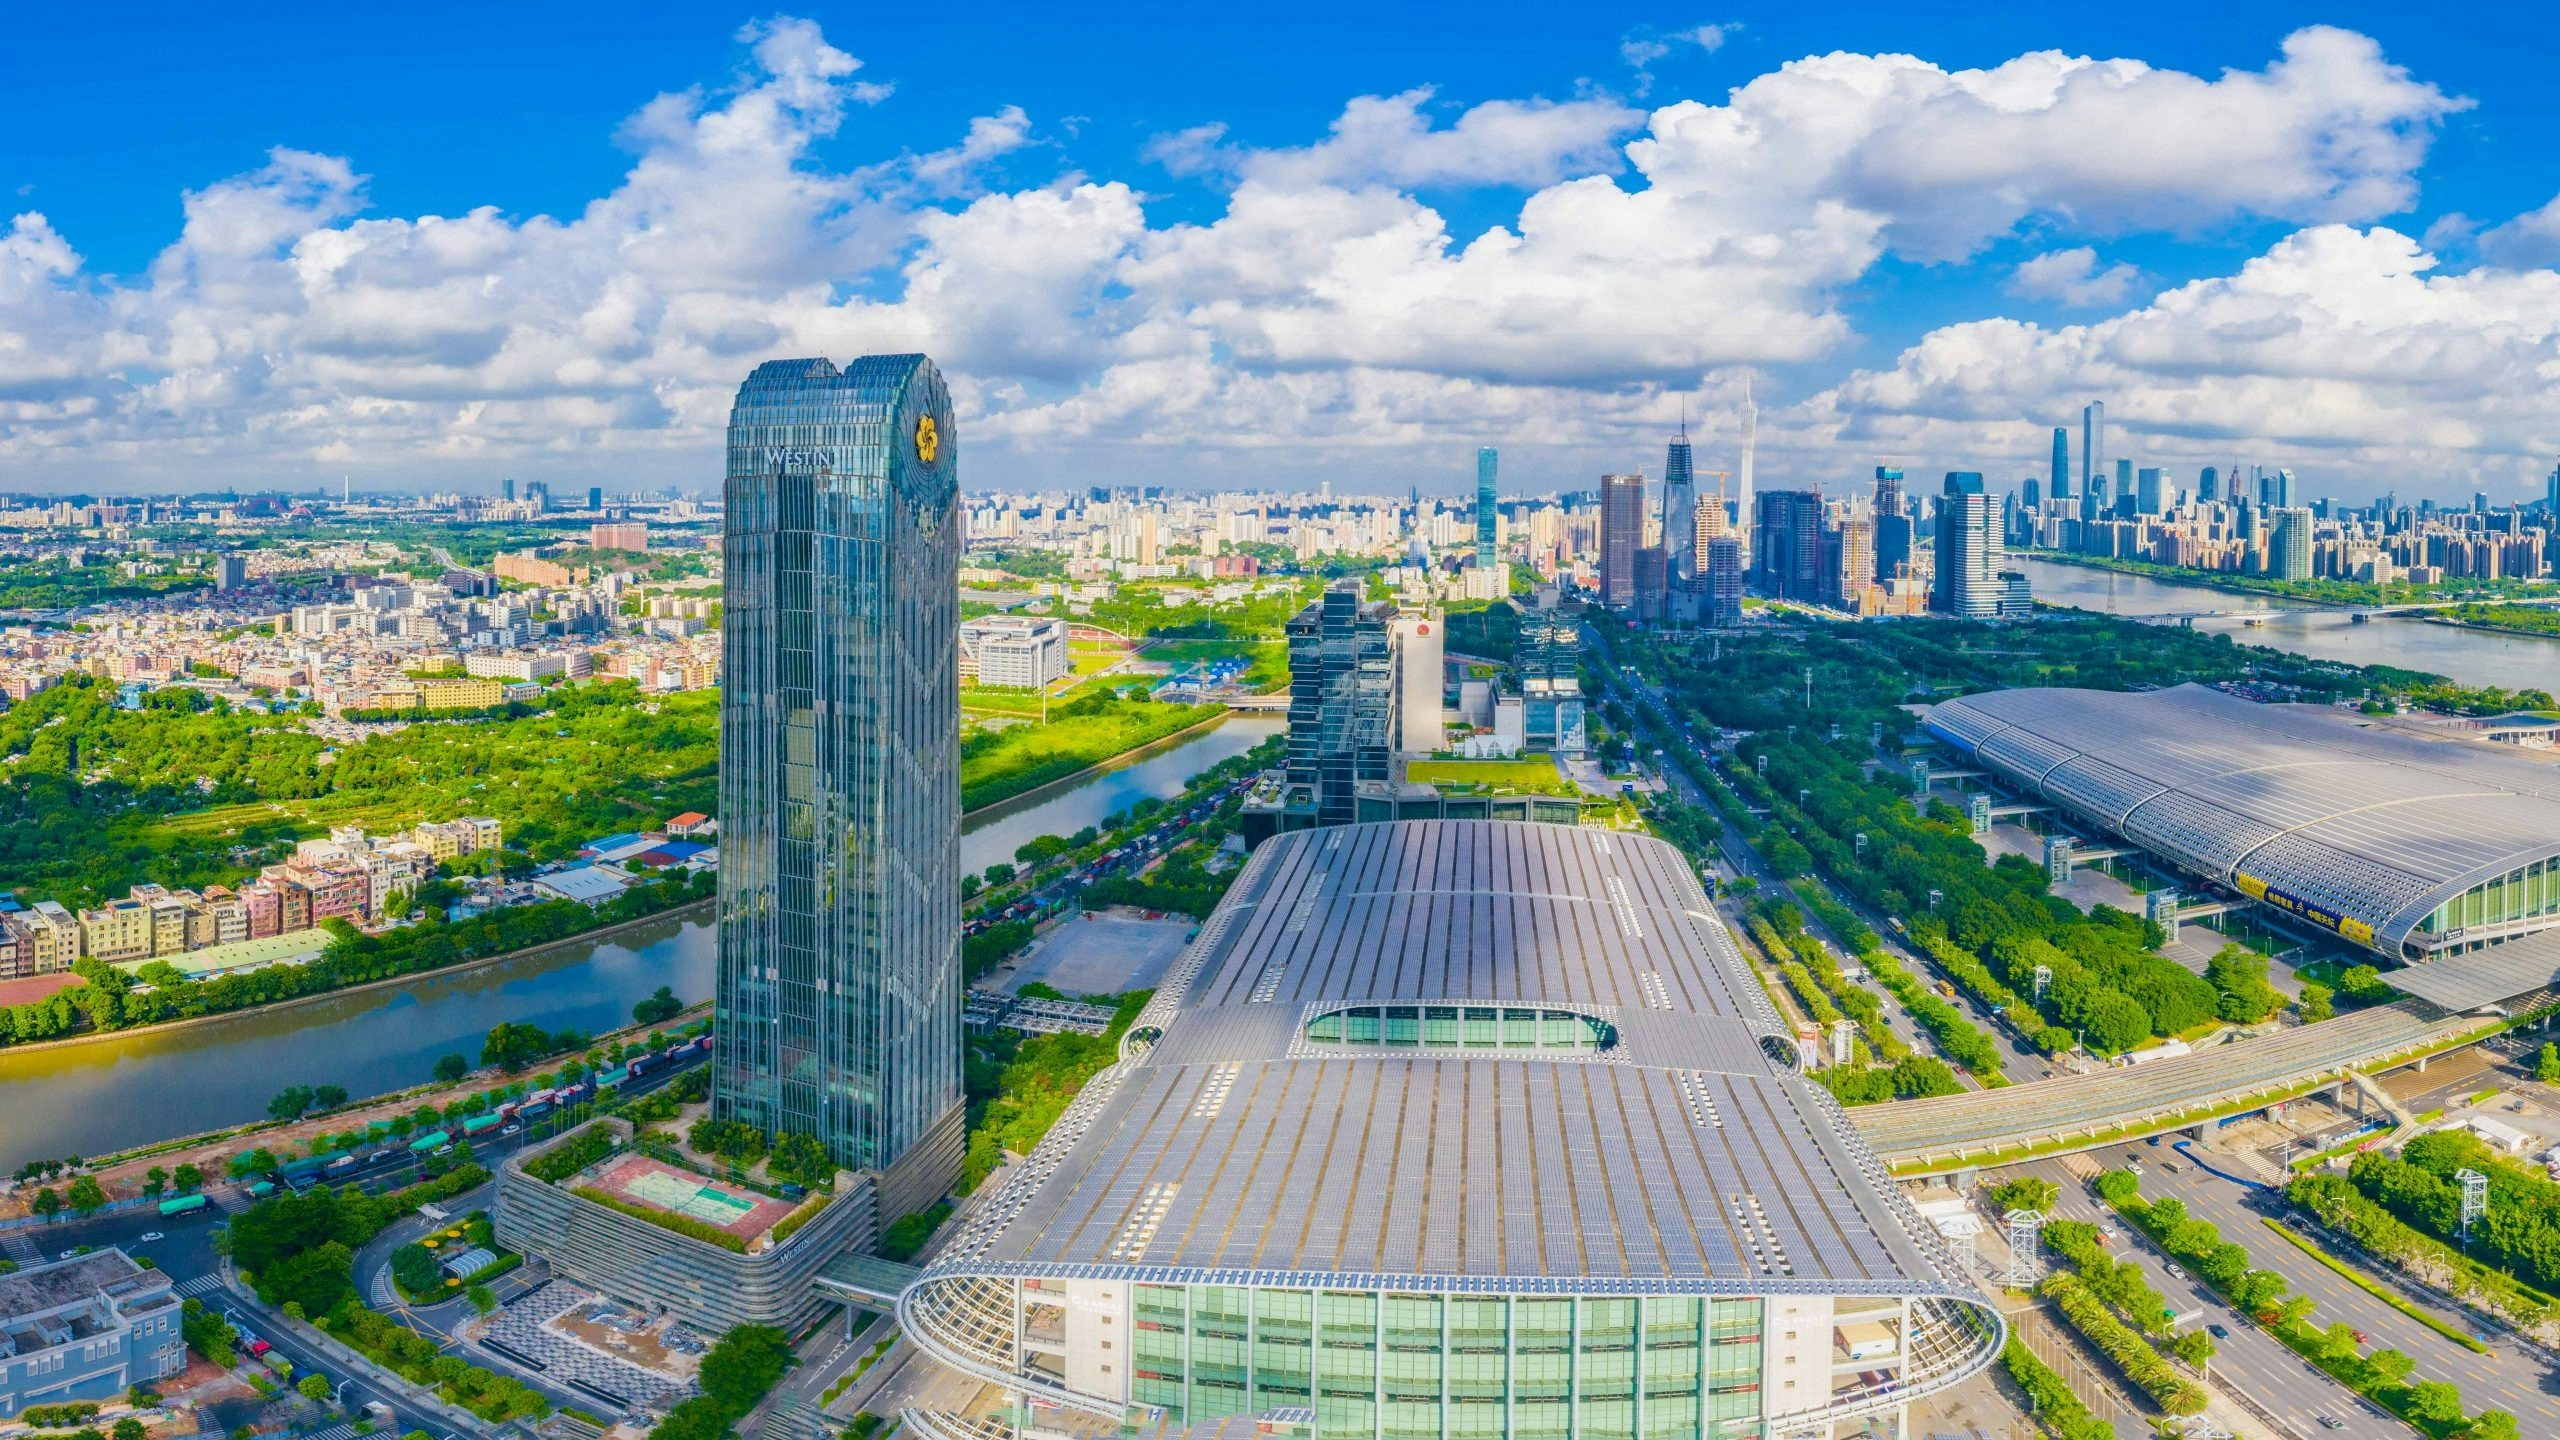 With a GDP of $1.7 trillion, Guangdong has long been China’s main manufacturing hub. As such, more luxury brands have shifted production to the province. Photo: Shutterstock